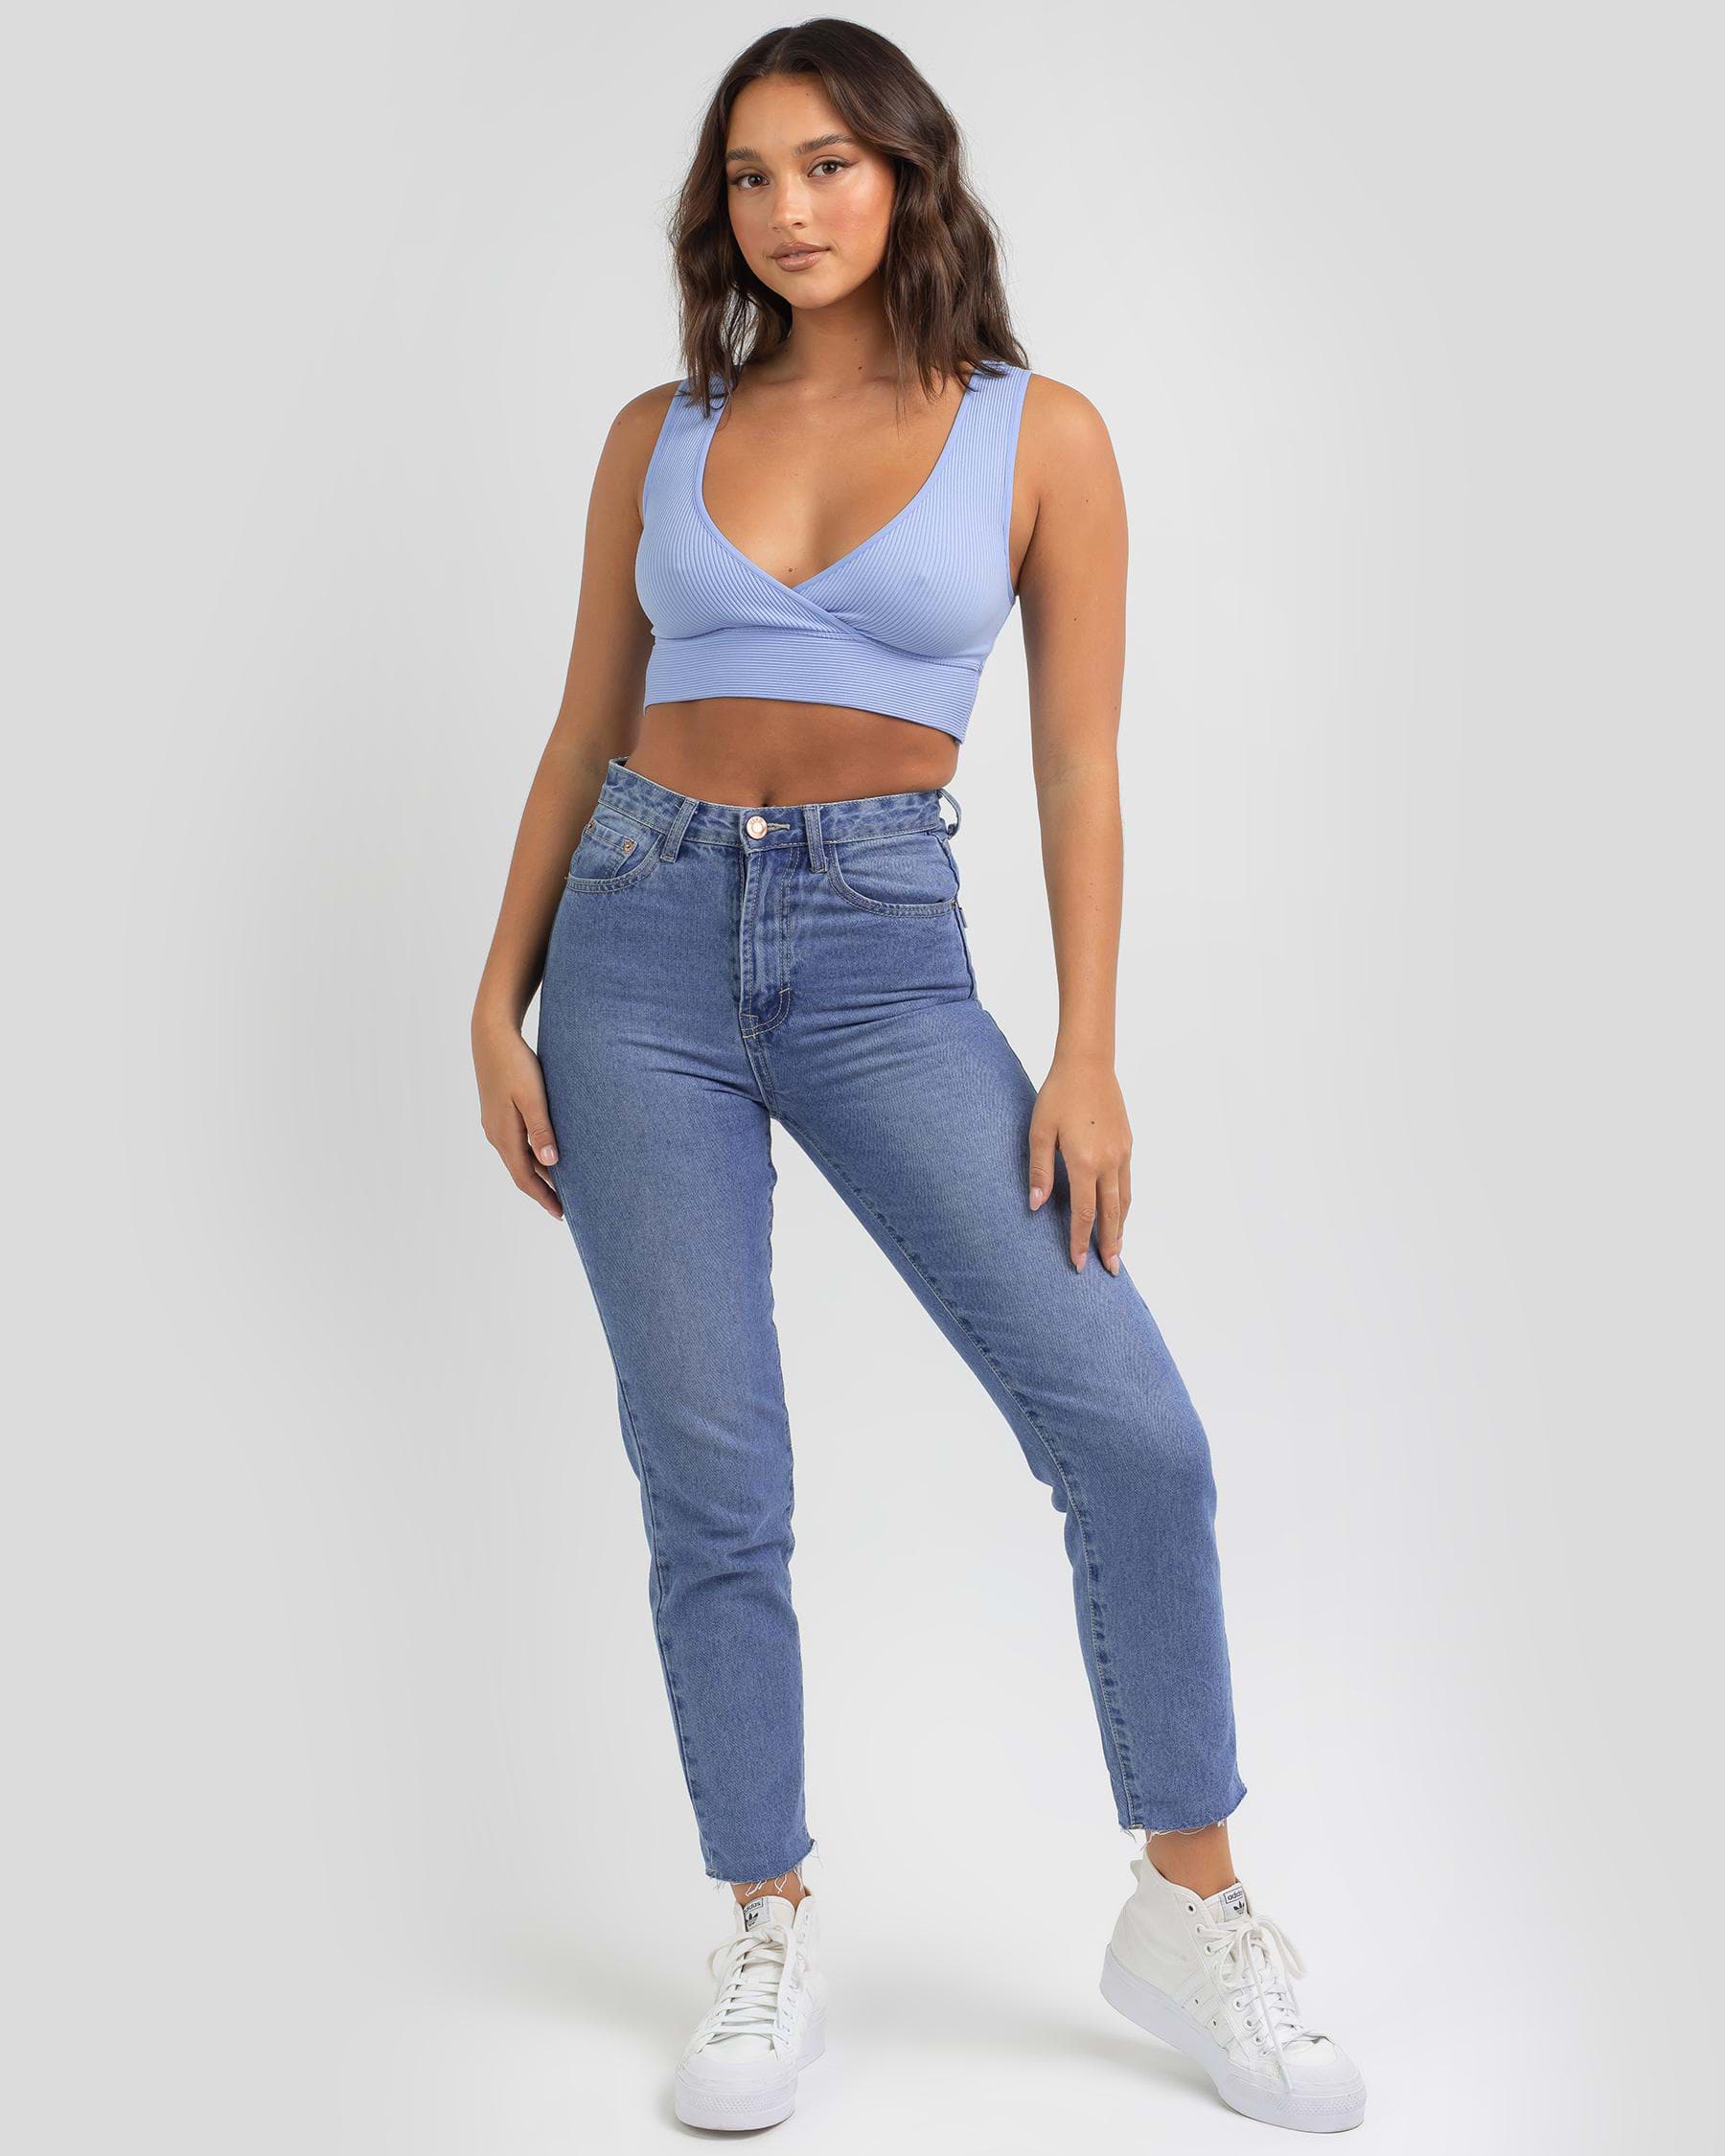 Mooloola Gretchen Top In Light Blue - Fast Shipping & Easy Returns ...